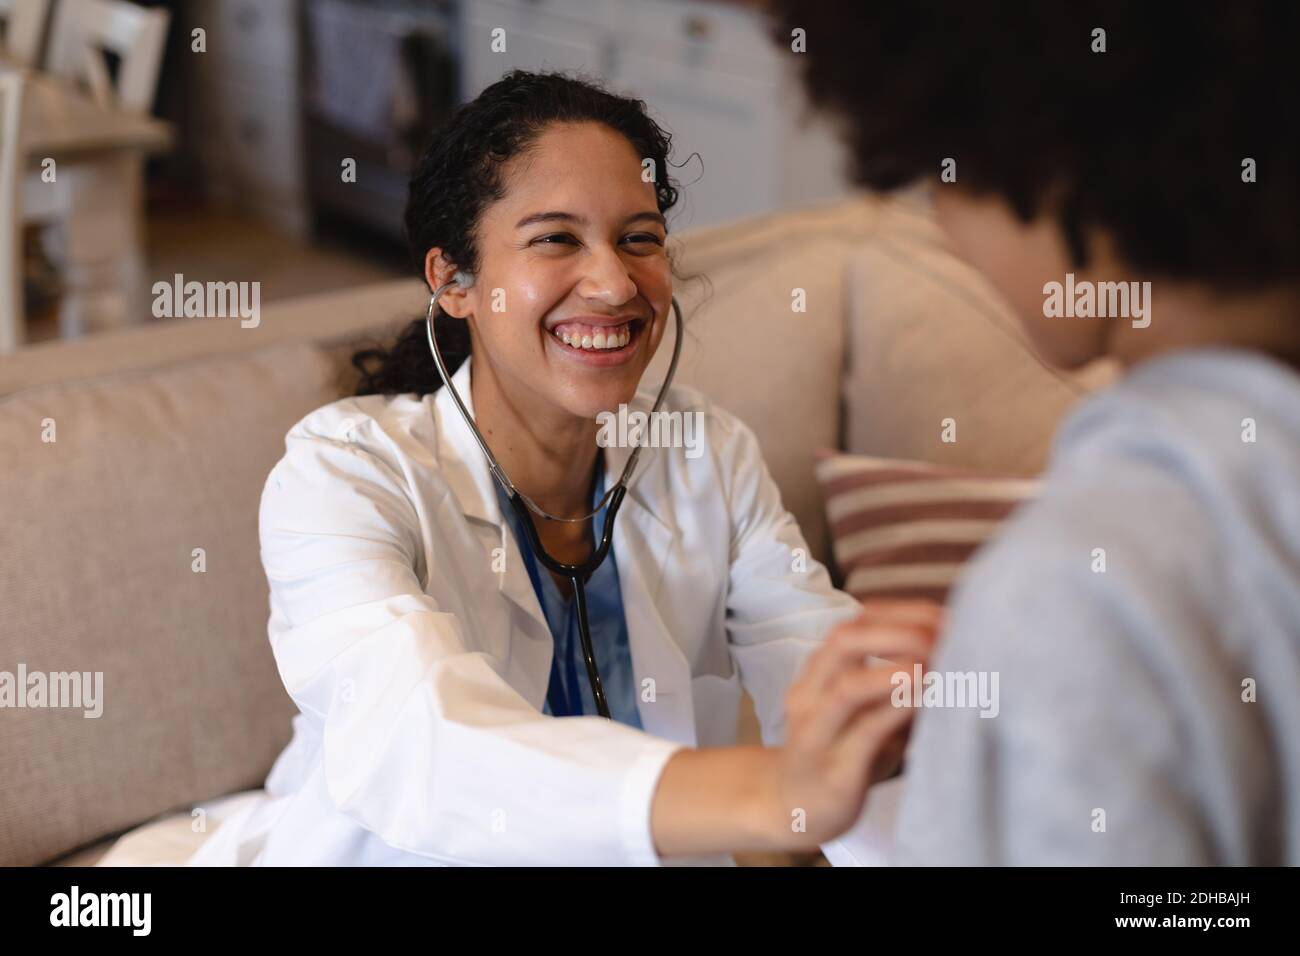 Mixed race girl being examined by mixed race female doctor Stock Photo